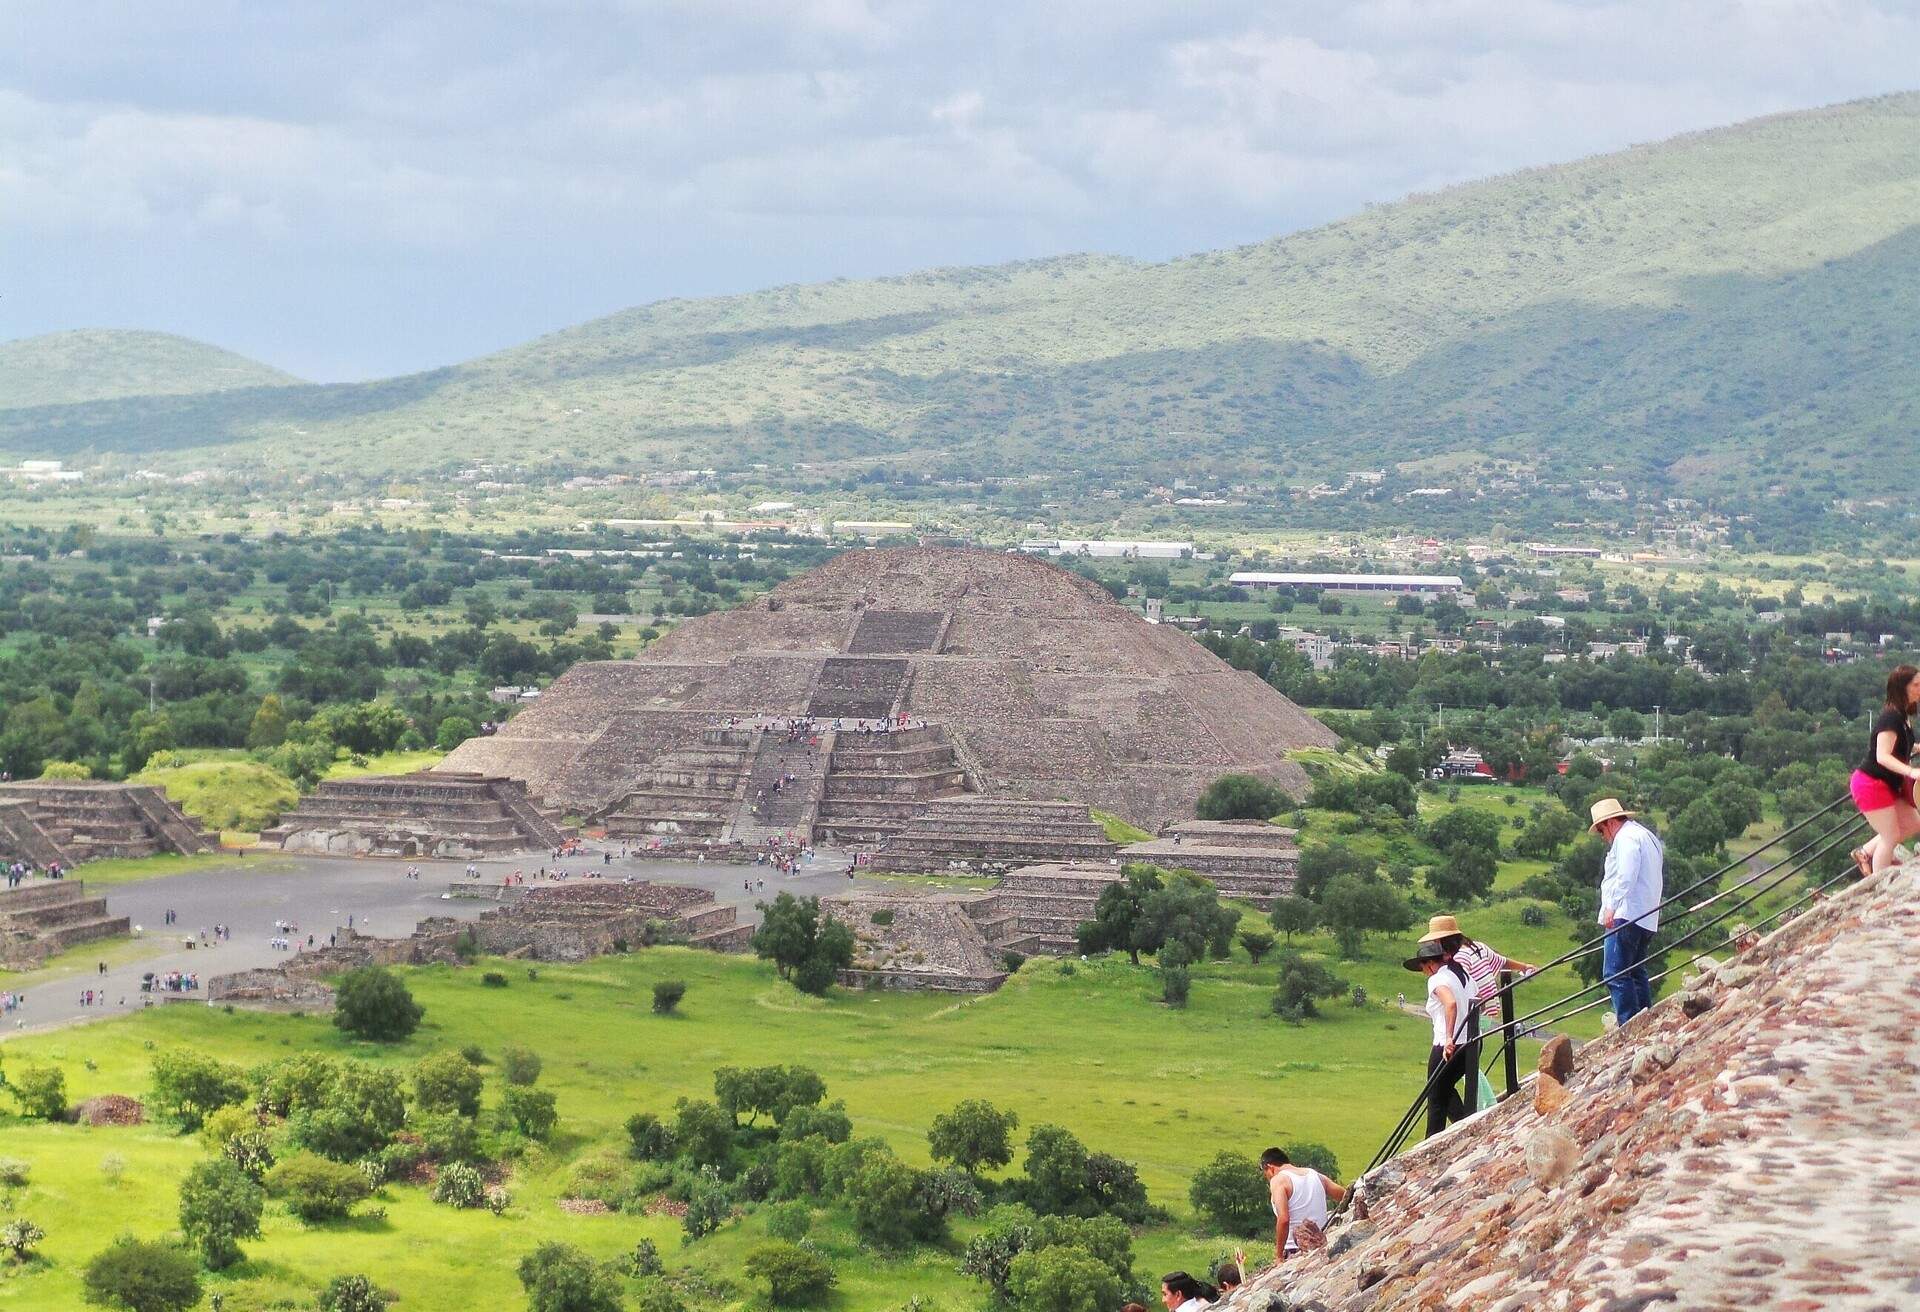 DEST_MEXICO_Teotihuacan-Pyramids_GettyImages-545782847